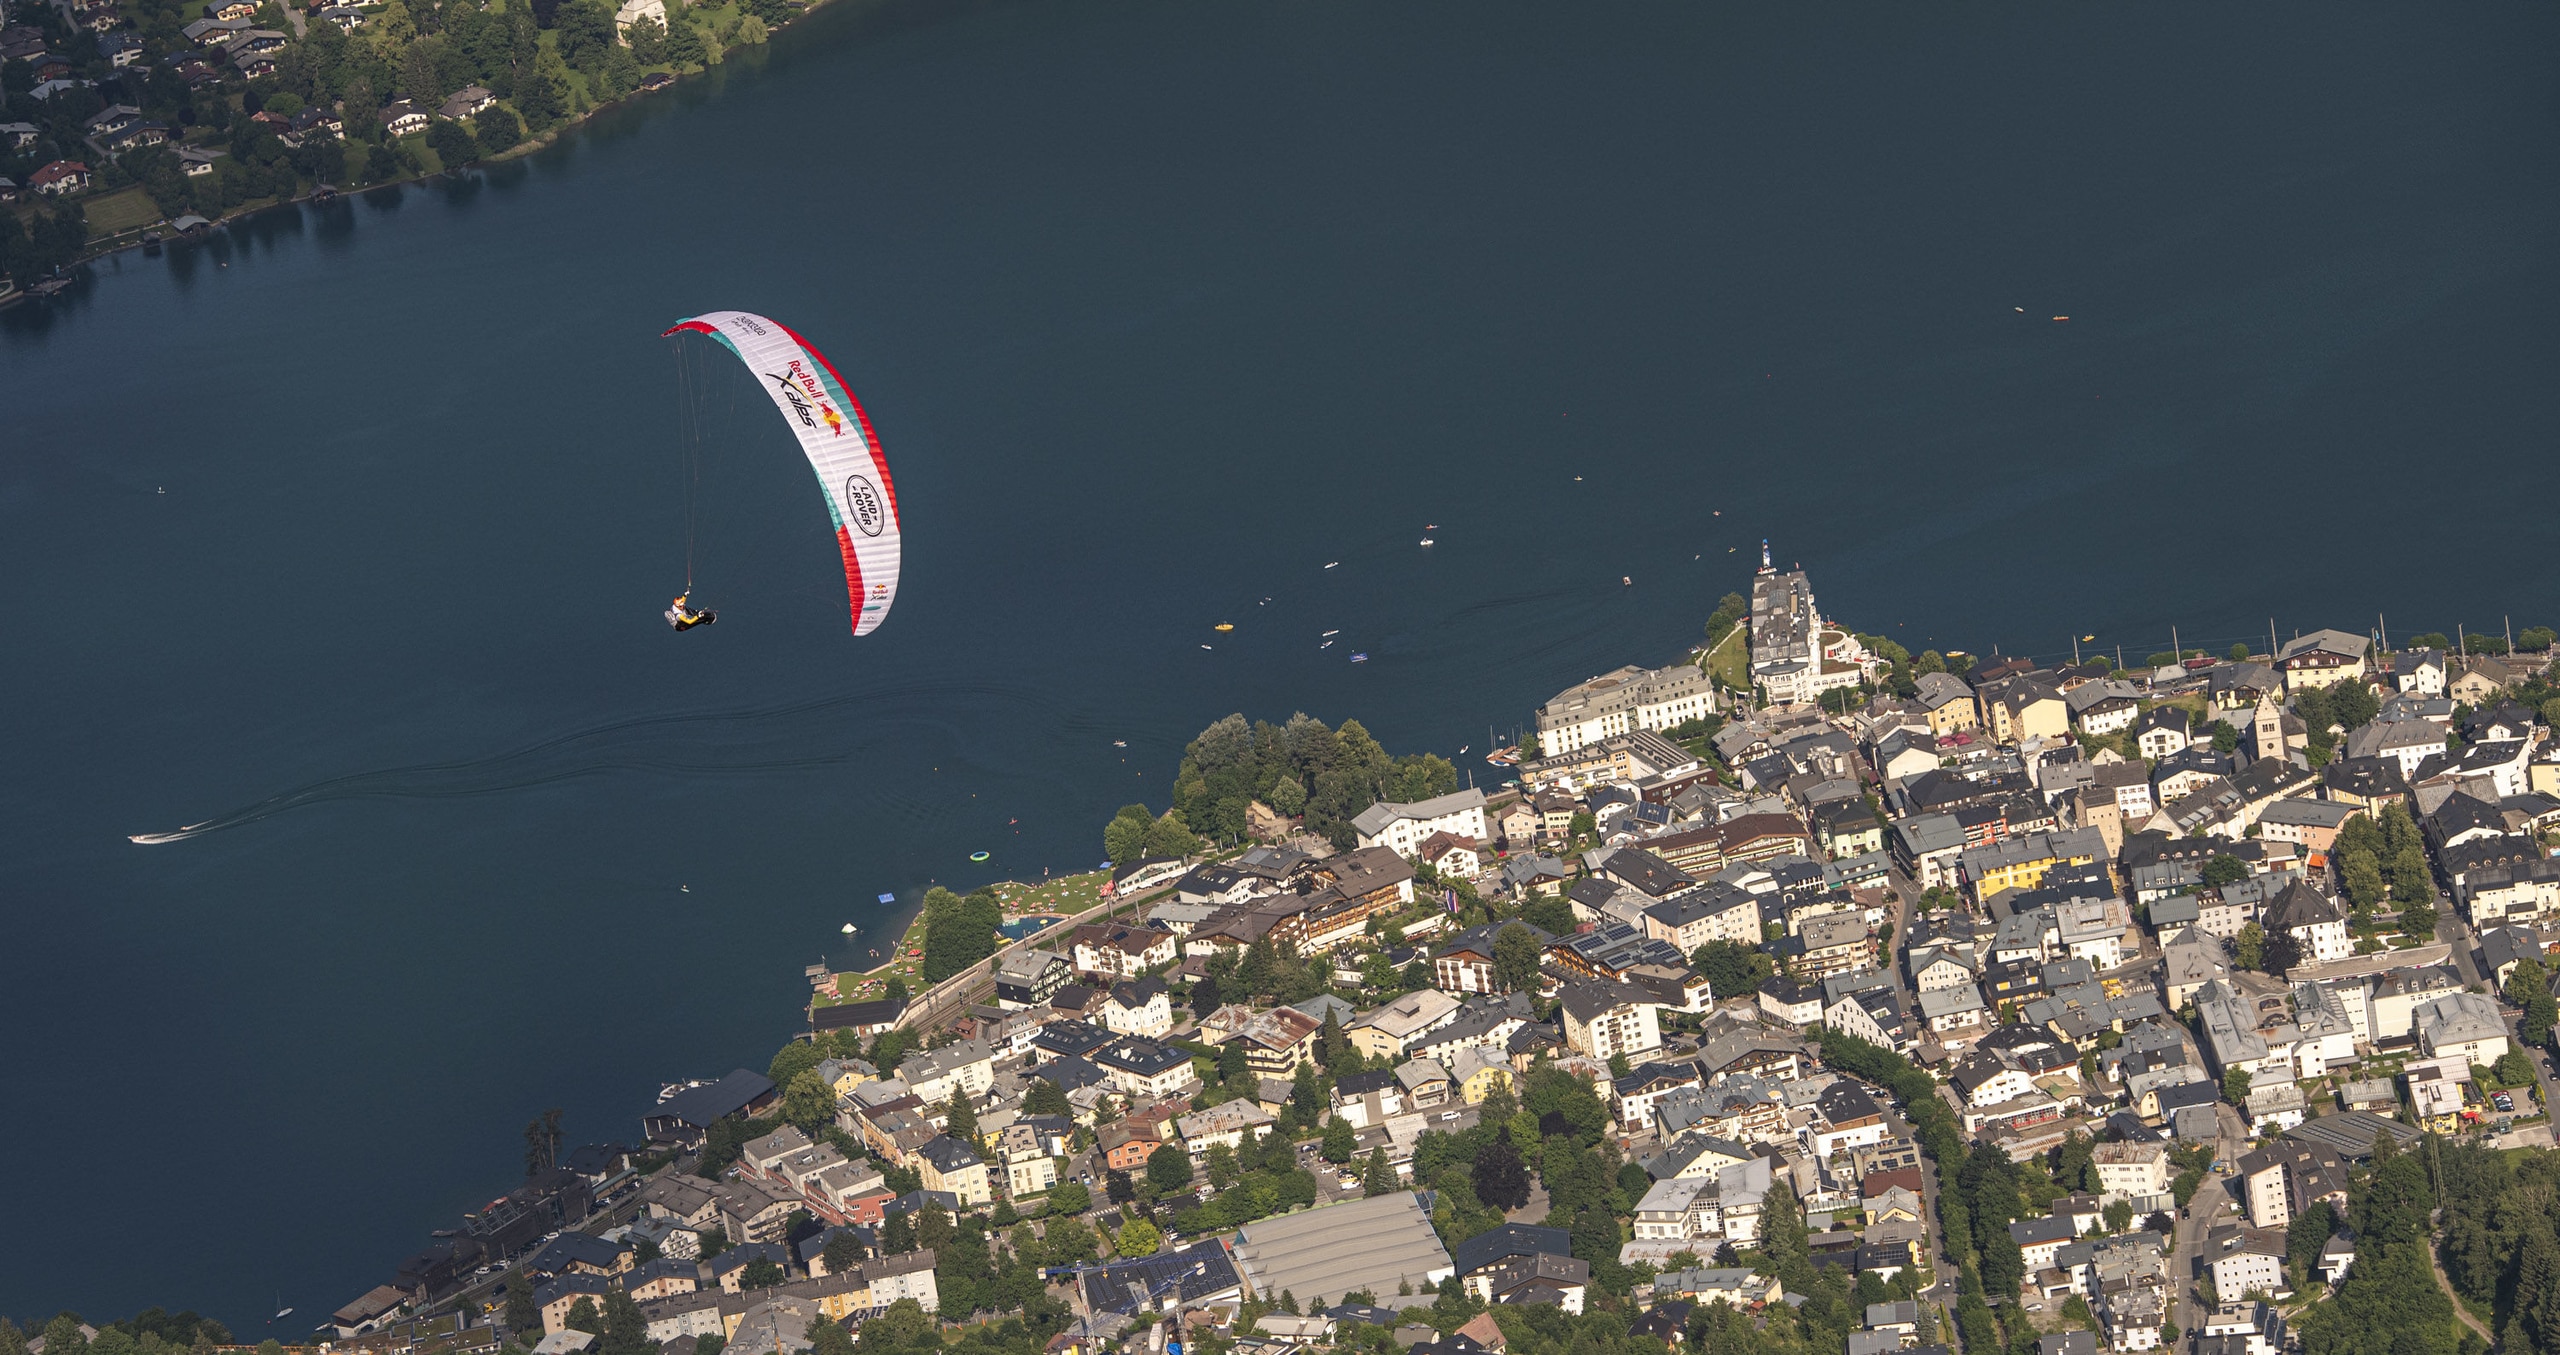 Chrigl Maurer (SUI1) performing during the Red Bull X-Alps at Zell am See / Austria on 28-June-2021. In this endurance adventure race athletes from 18 nations have to fly with paragliders or hike from Salzburg along the alps towards France, around the Mont Blanc back to Salzburg.